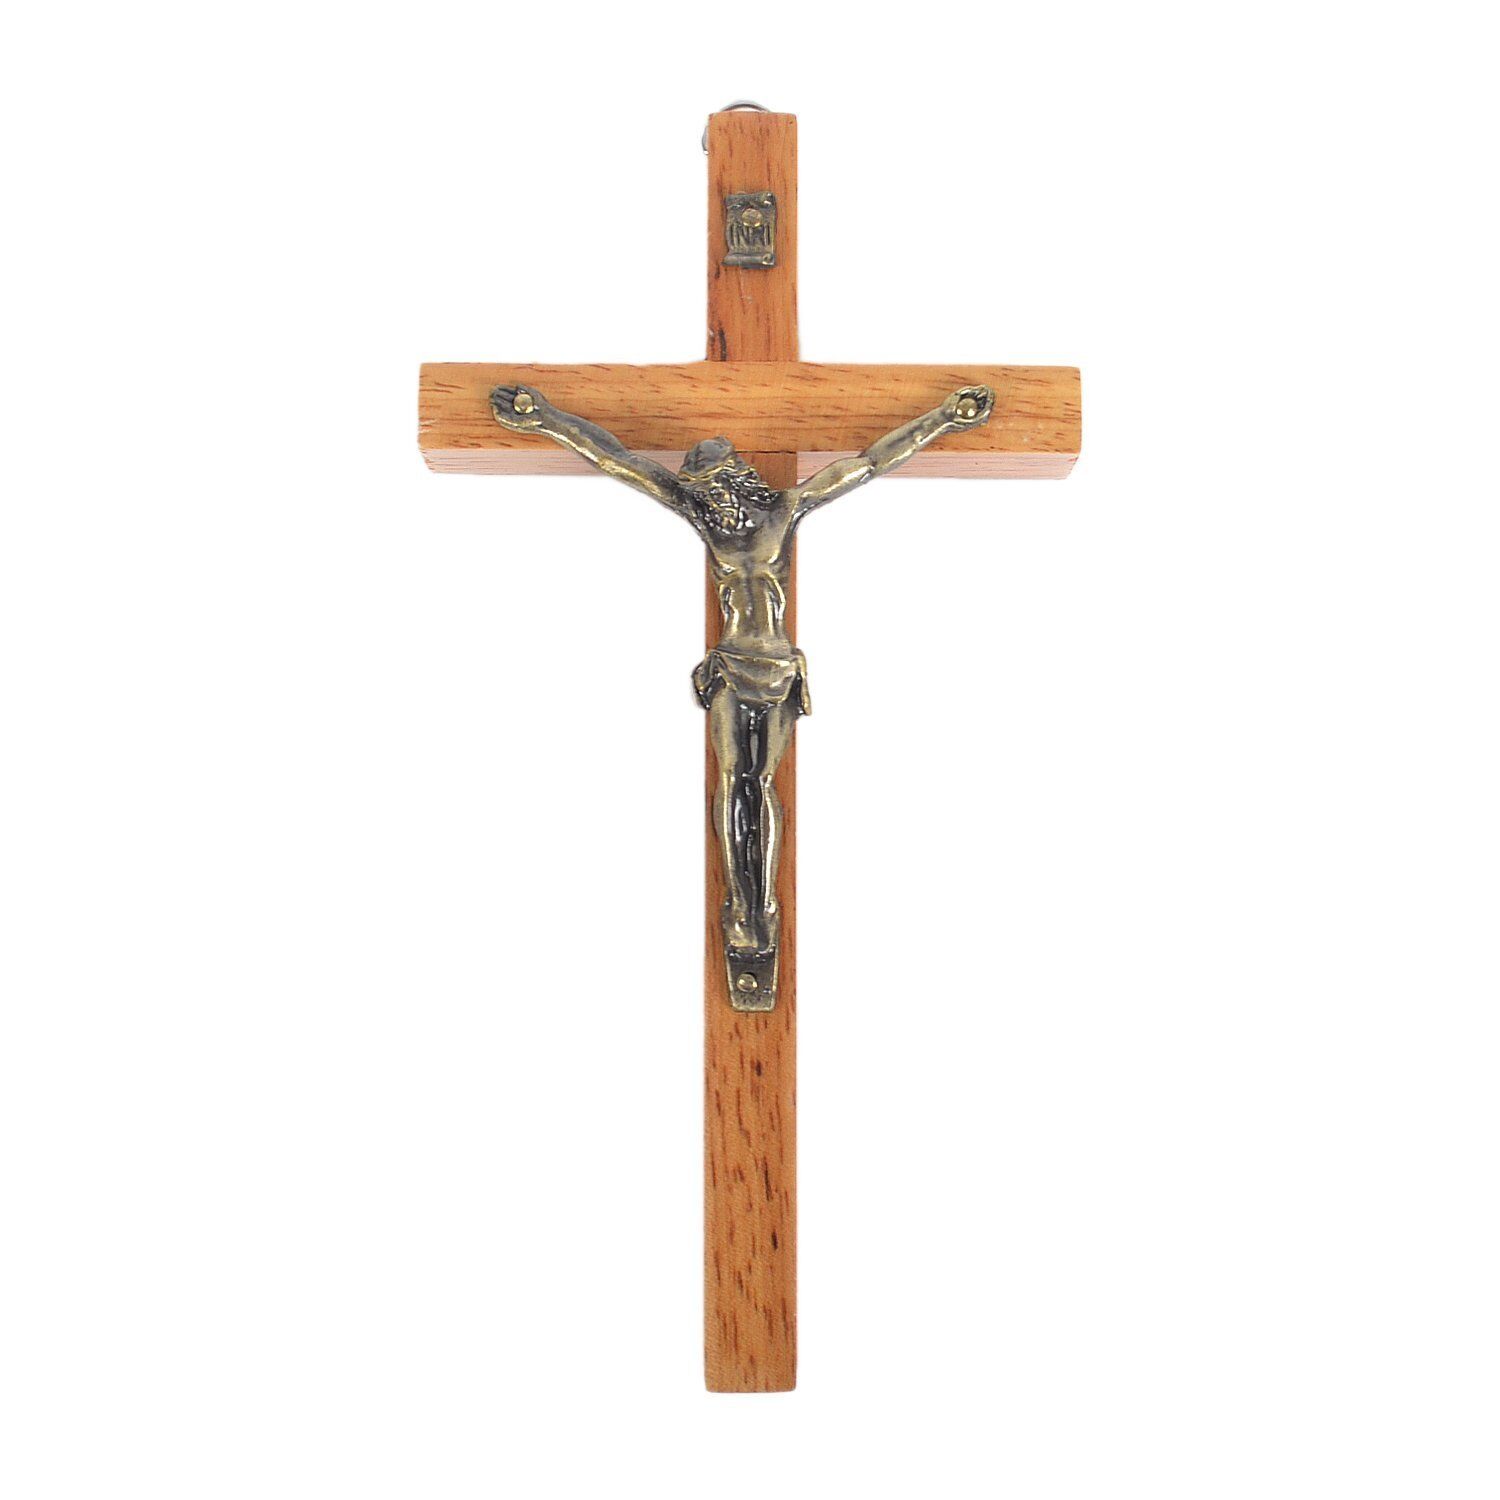 Vintage Wooden Metal Wall Cross Crucifix Holy Religious Carved Christ Natural